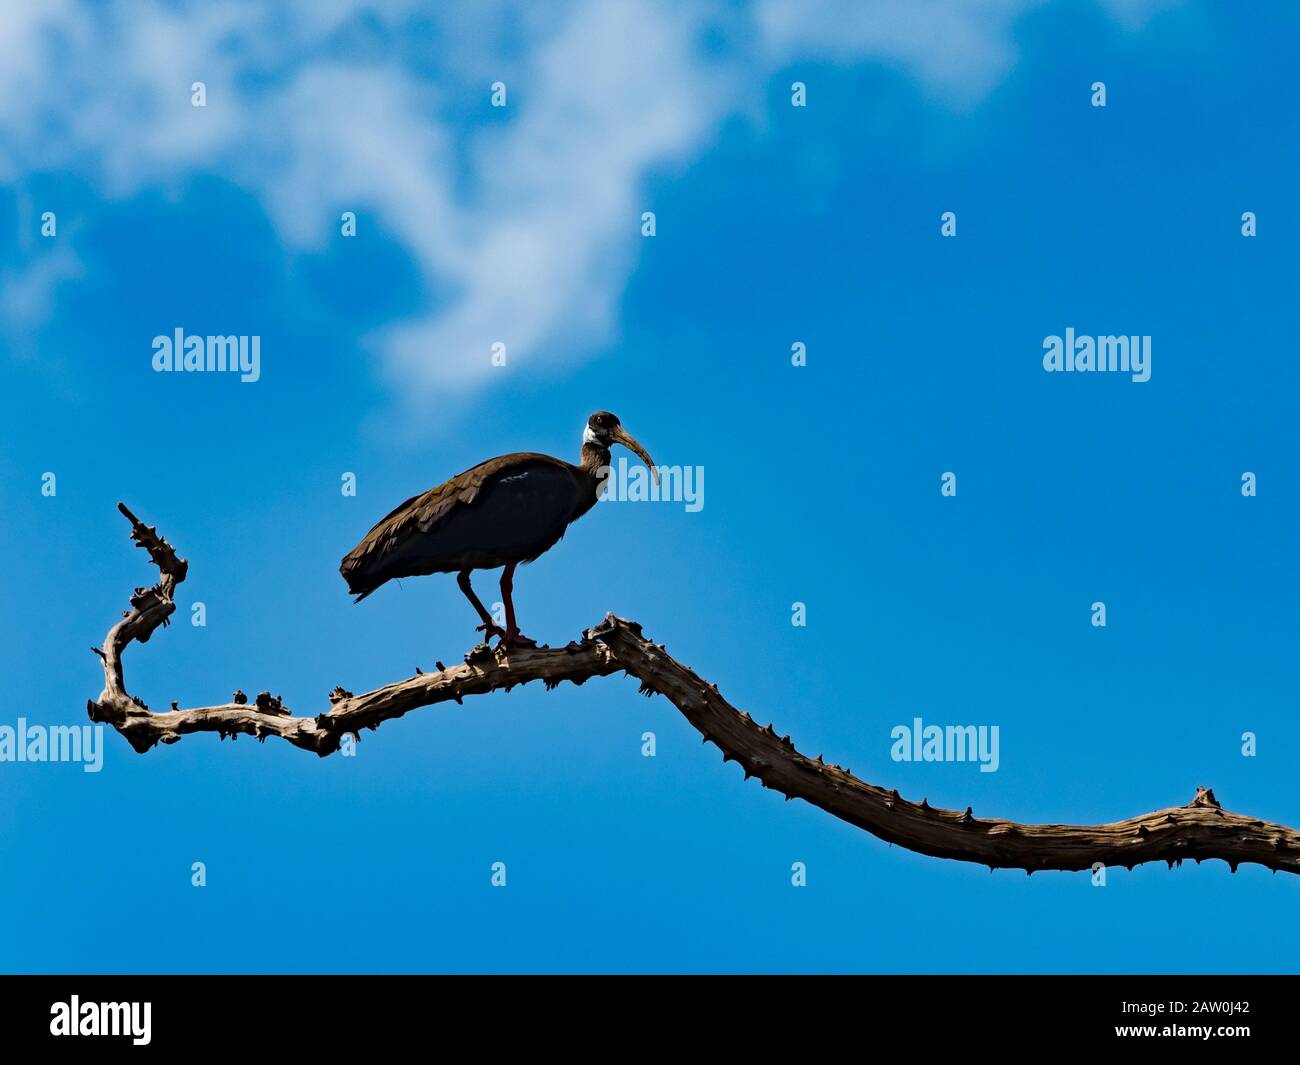 A critically endangered White-shouldered Ibis in the Tmatboey region of Cambodia Stock Photo